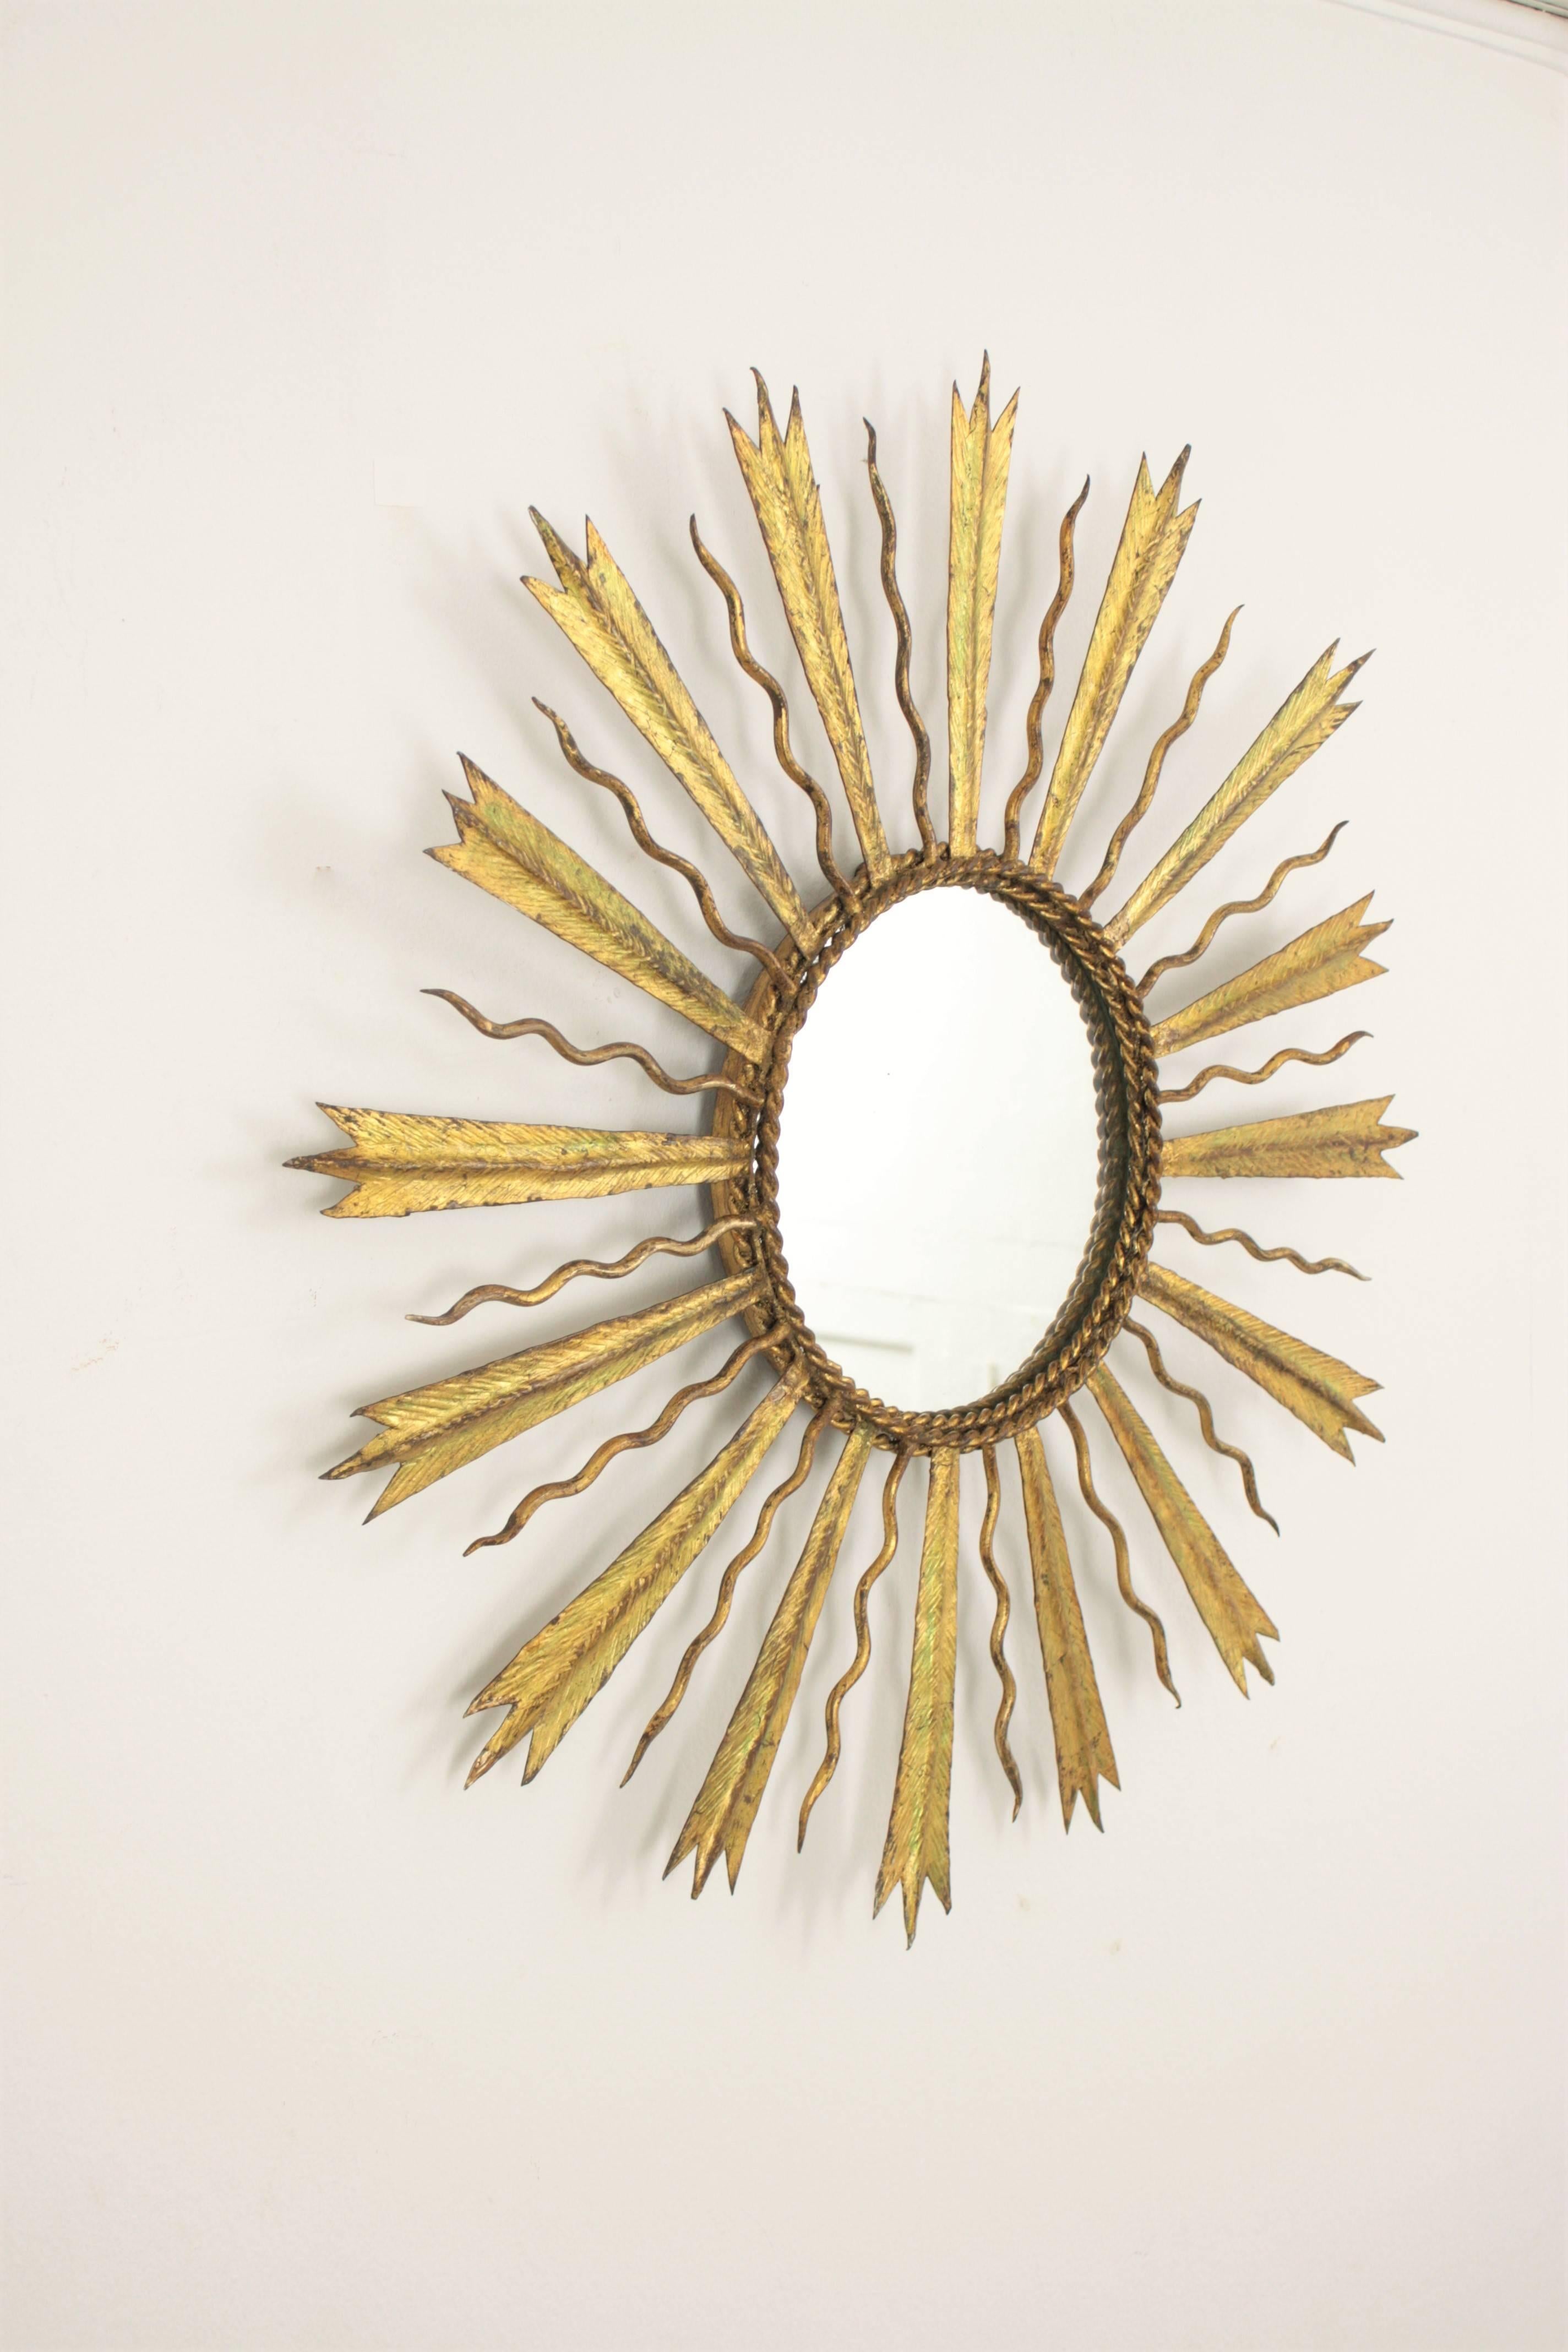 Lovely hand-hammered gilt iron sunburst mirror with combined beams in the style of Gilbert Poillerat,
France, 1930s.

Beautiful to place it alone or to create a wall decoration with other mirrors in this manner.
Avaliable a huge collection of